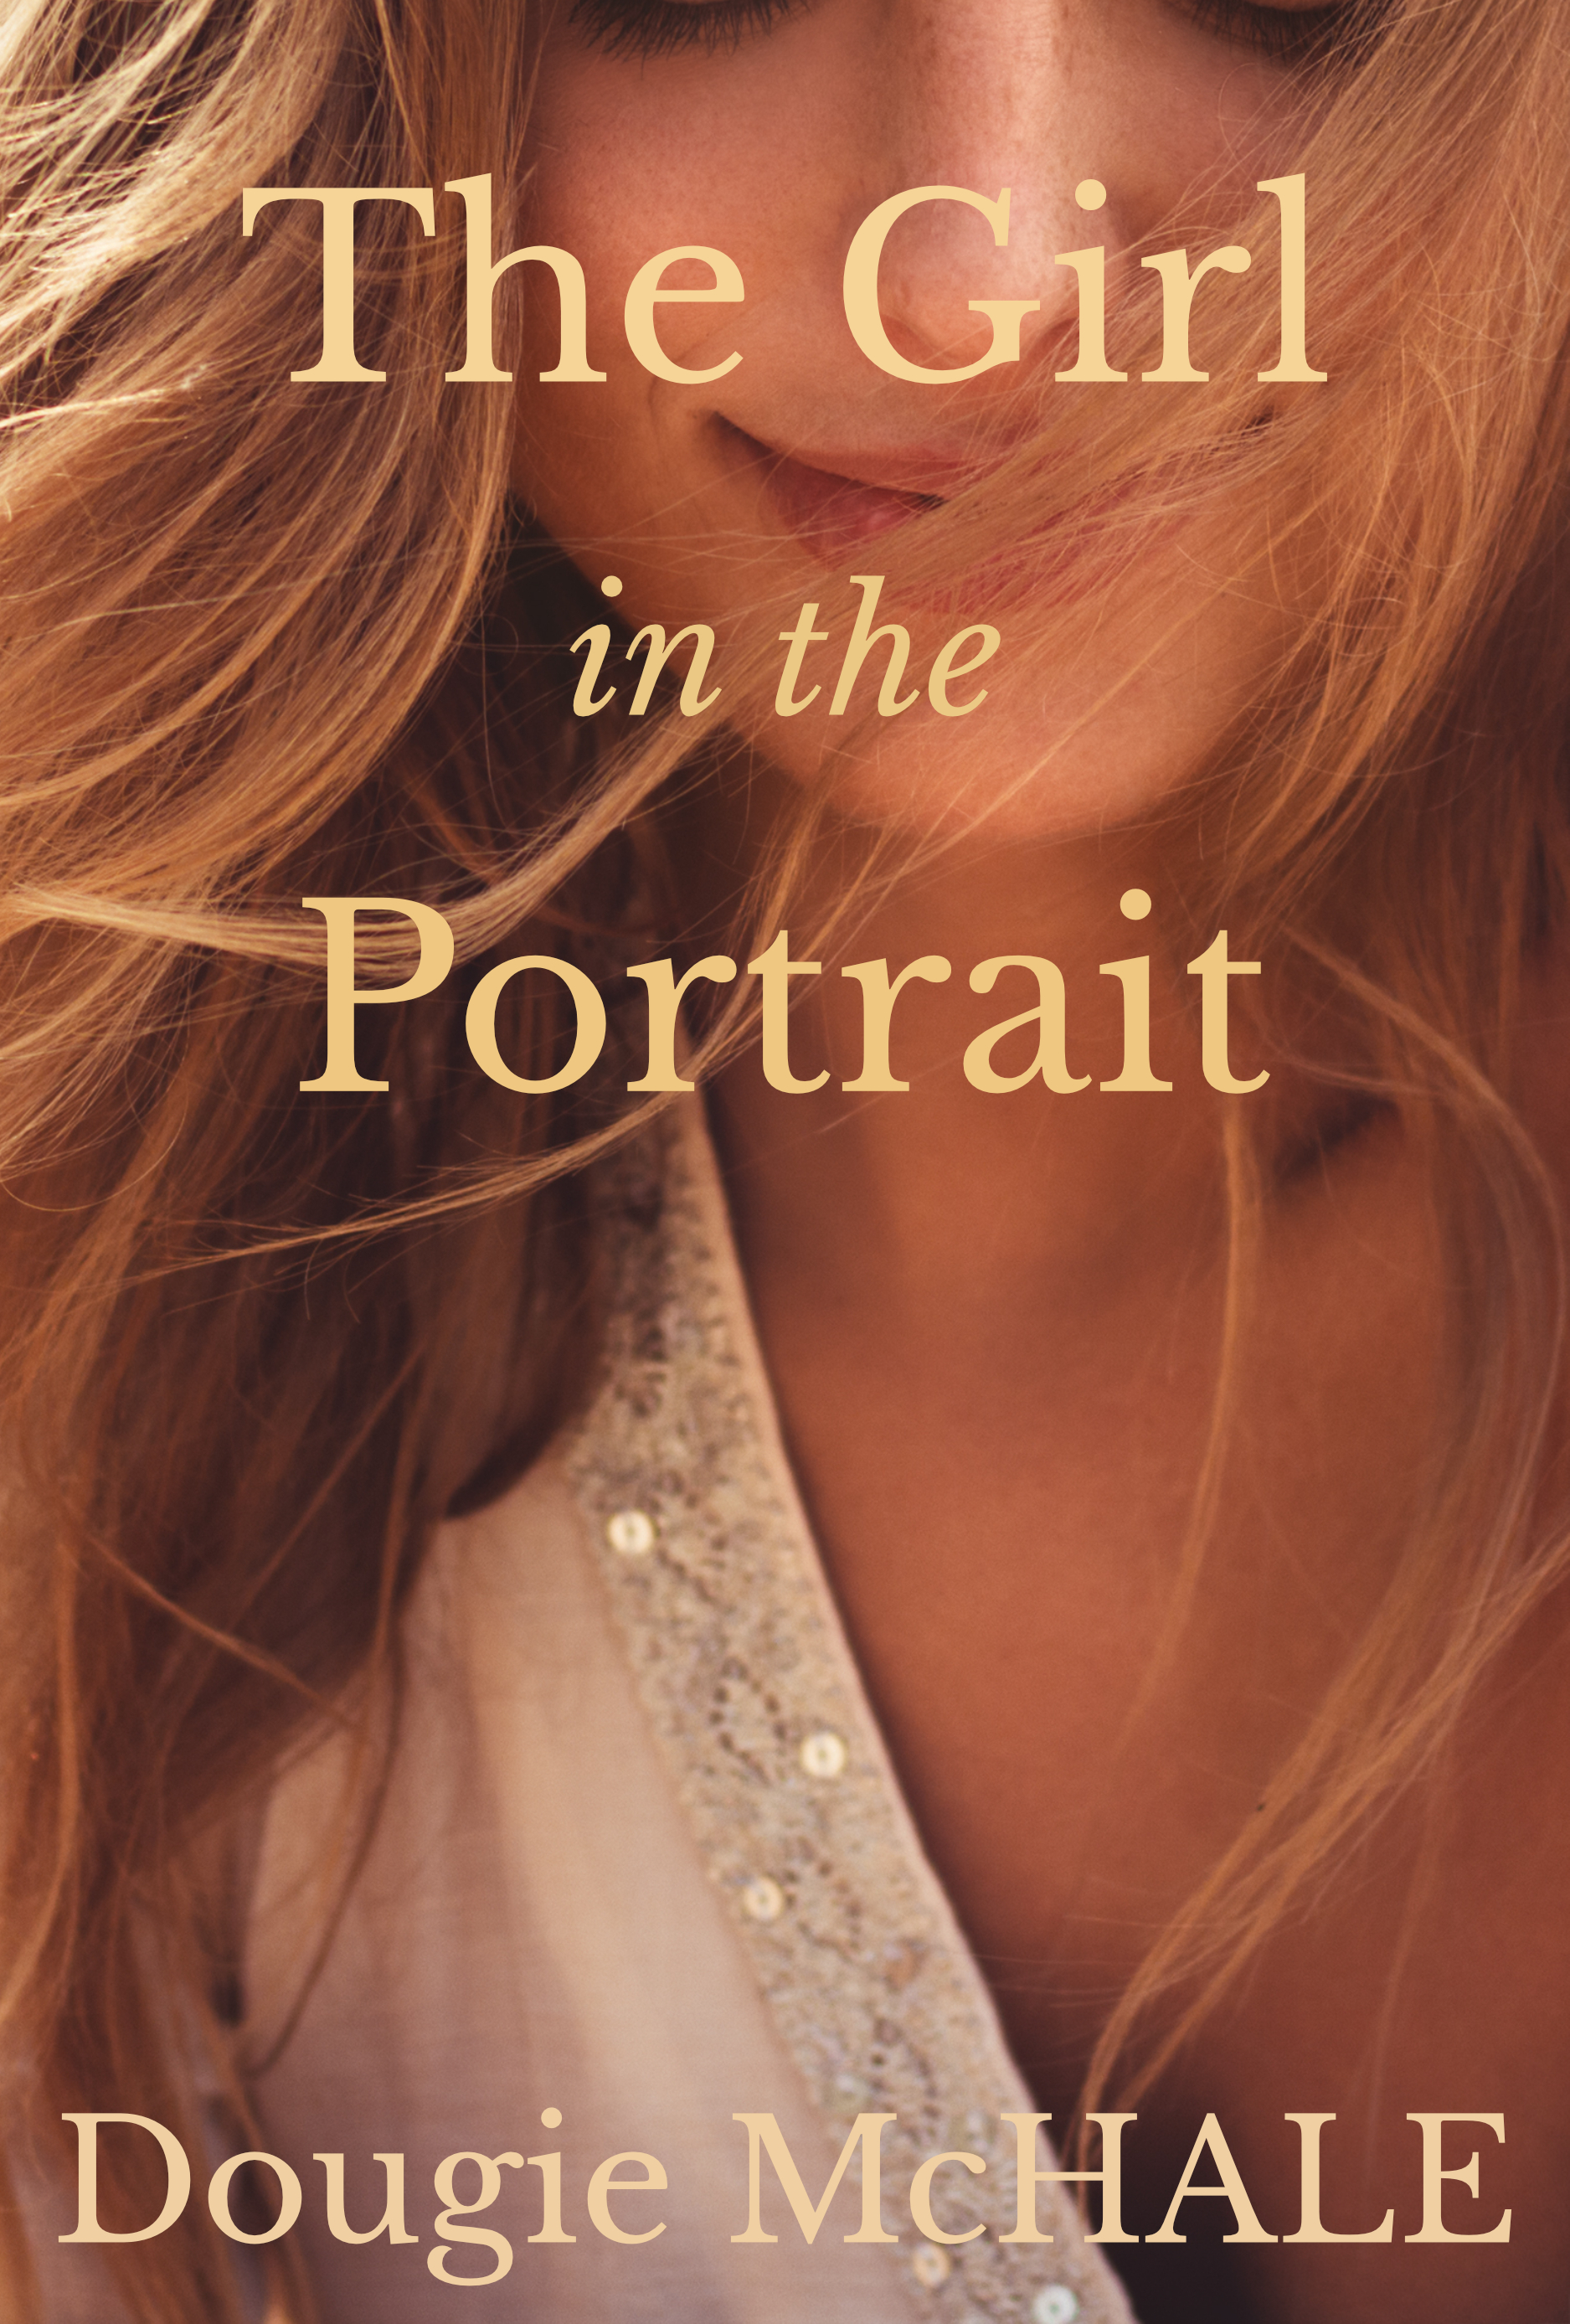 The Girl in the Portrait book cover